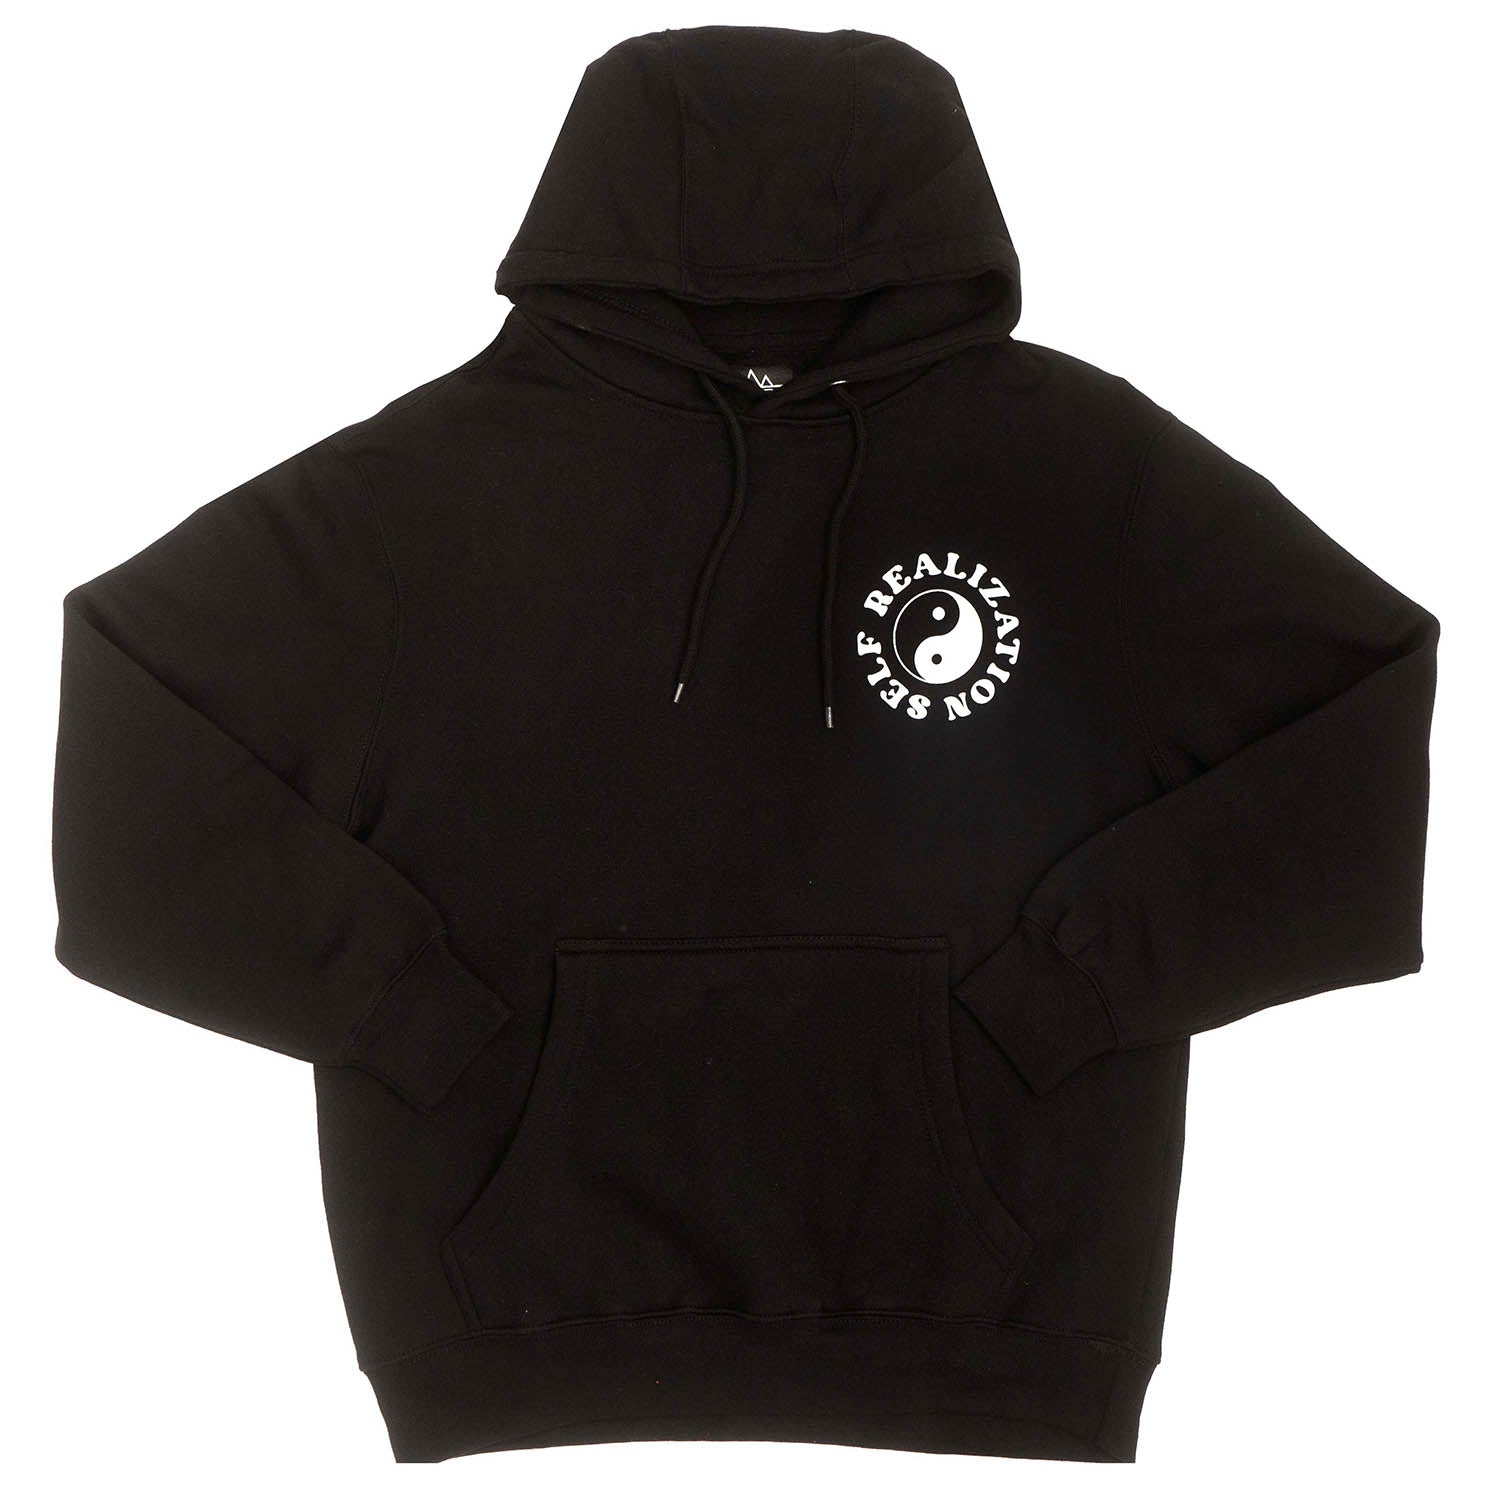 men's graphic black fleece hoodie with yin yang symbols , yoga positions and mental health positive text printed on front and back. Full front photo.